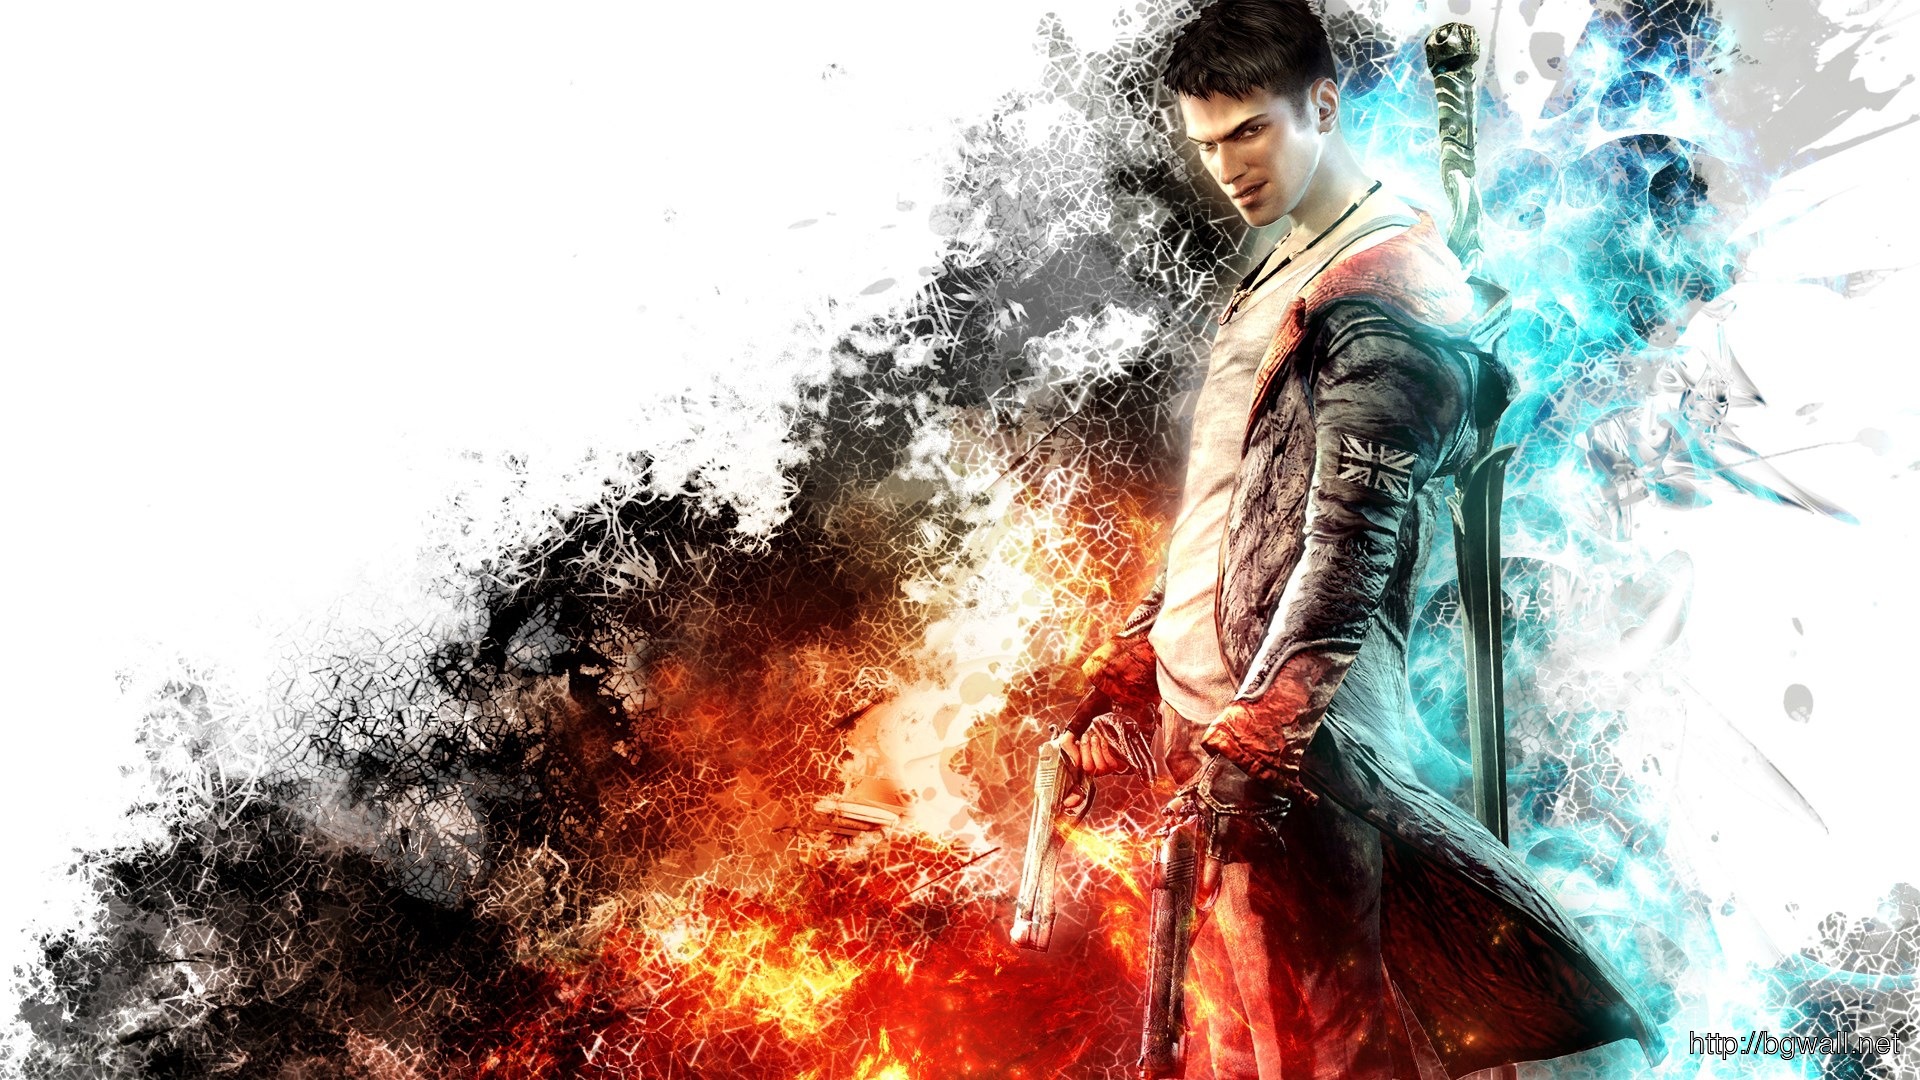 Download Devil May Cry 5 Wallpaper High Resolution